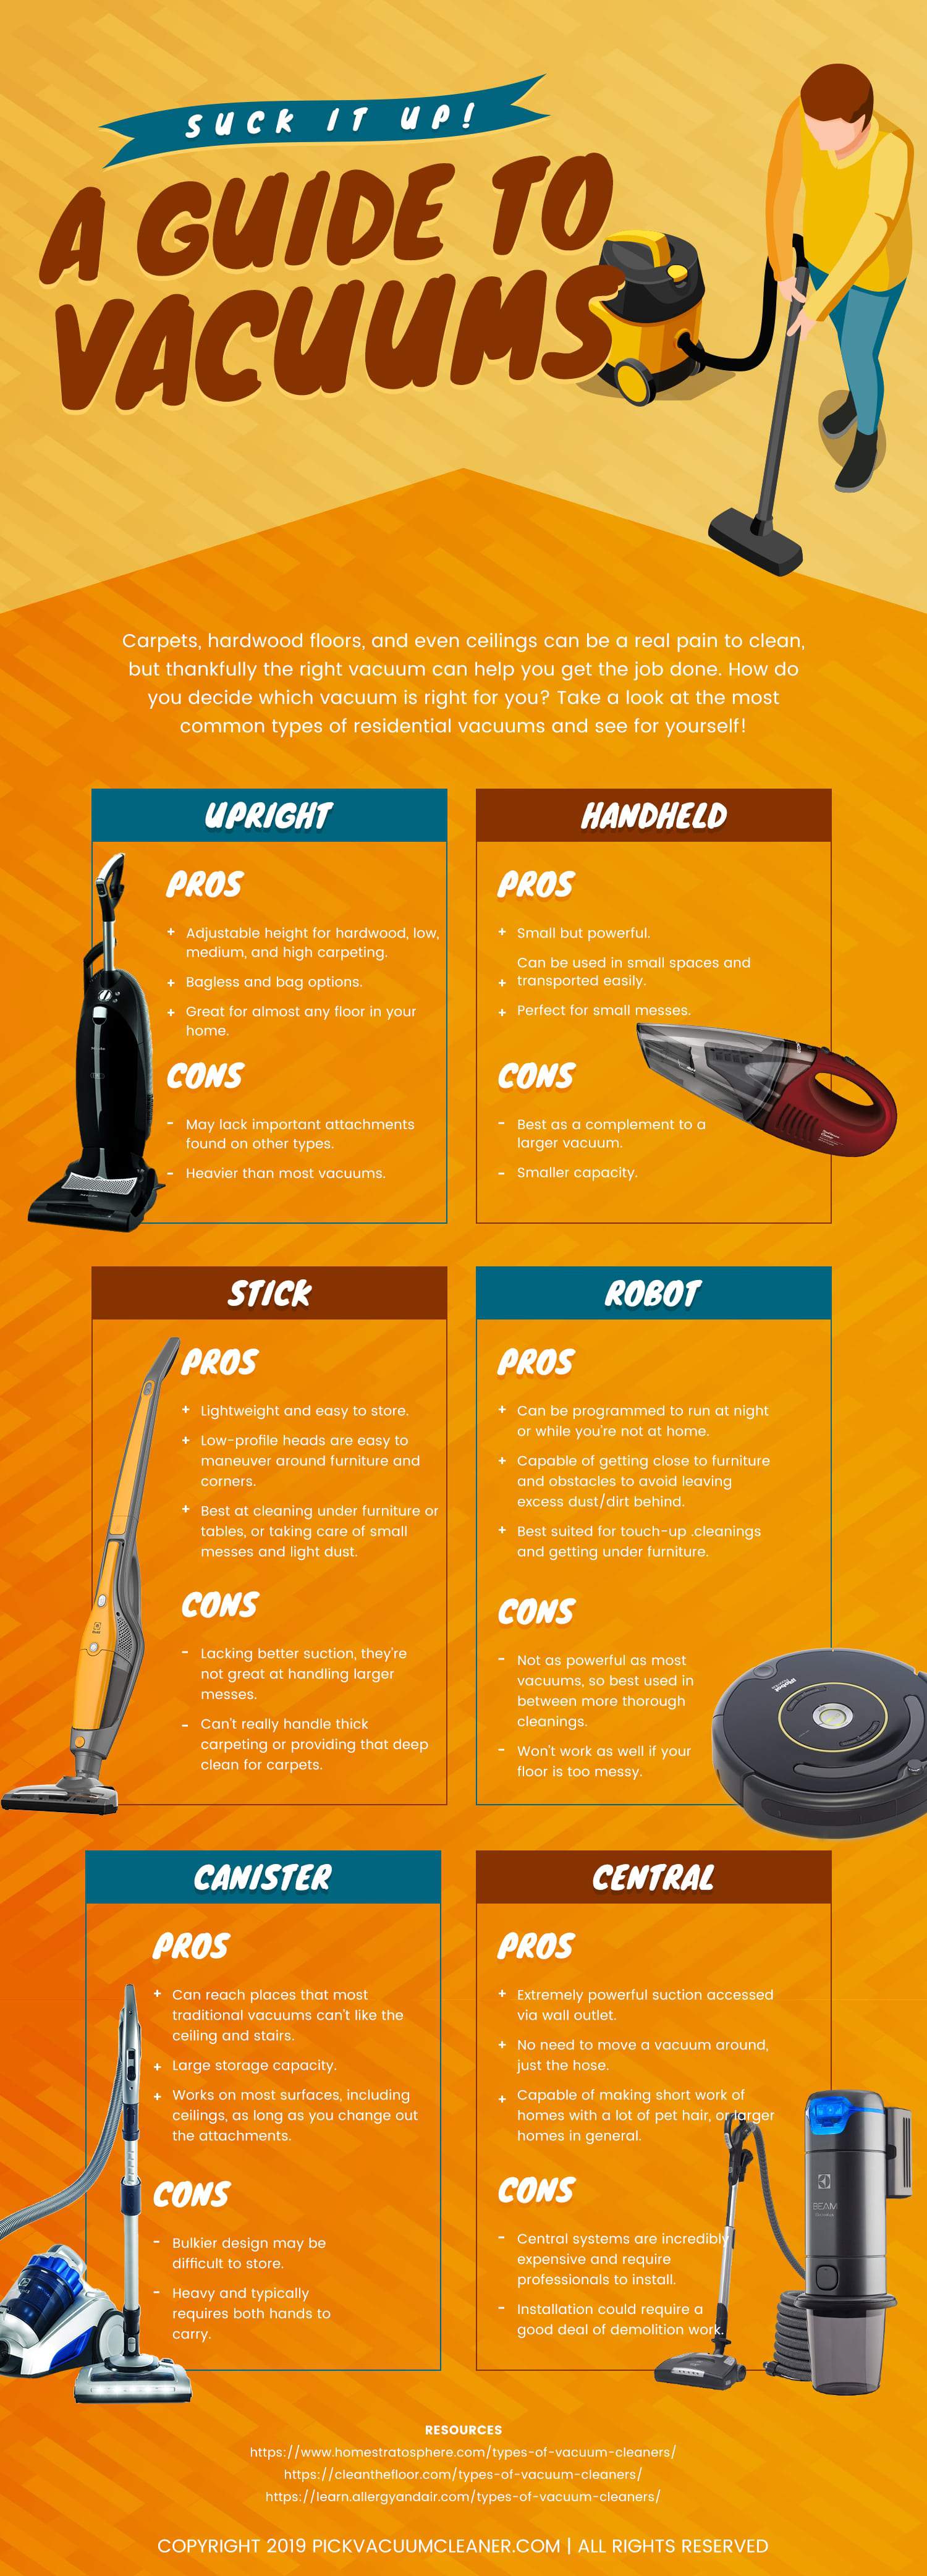 A Guide to Vacuums